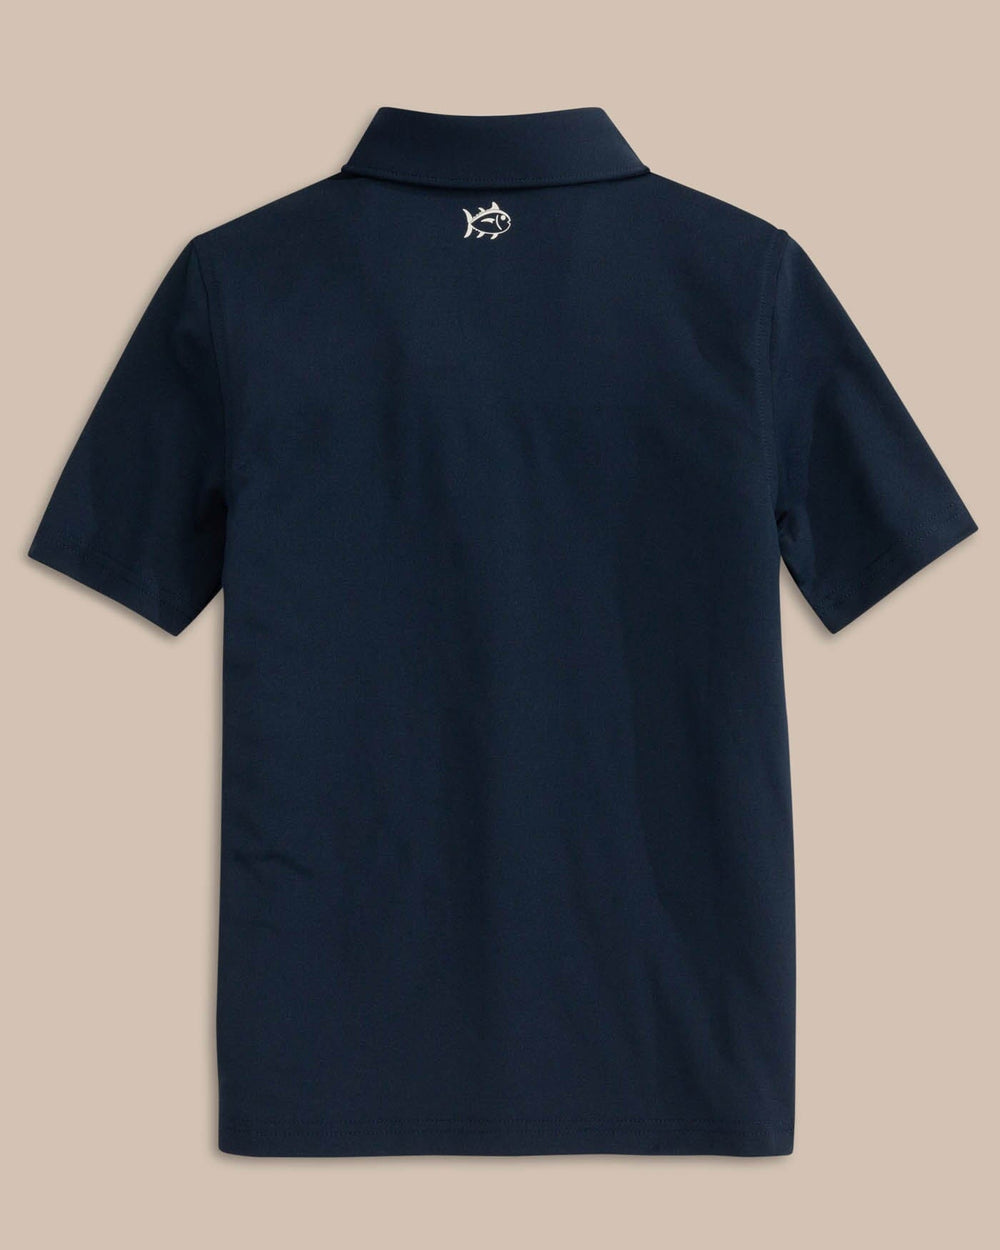 The back view of the Boys Driver Performance Polo Shirt by Southern Tide - True Navy